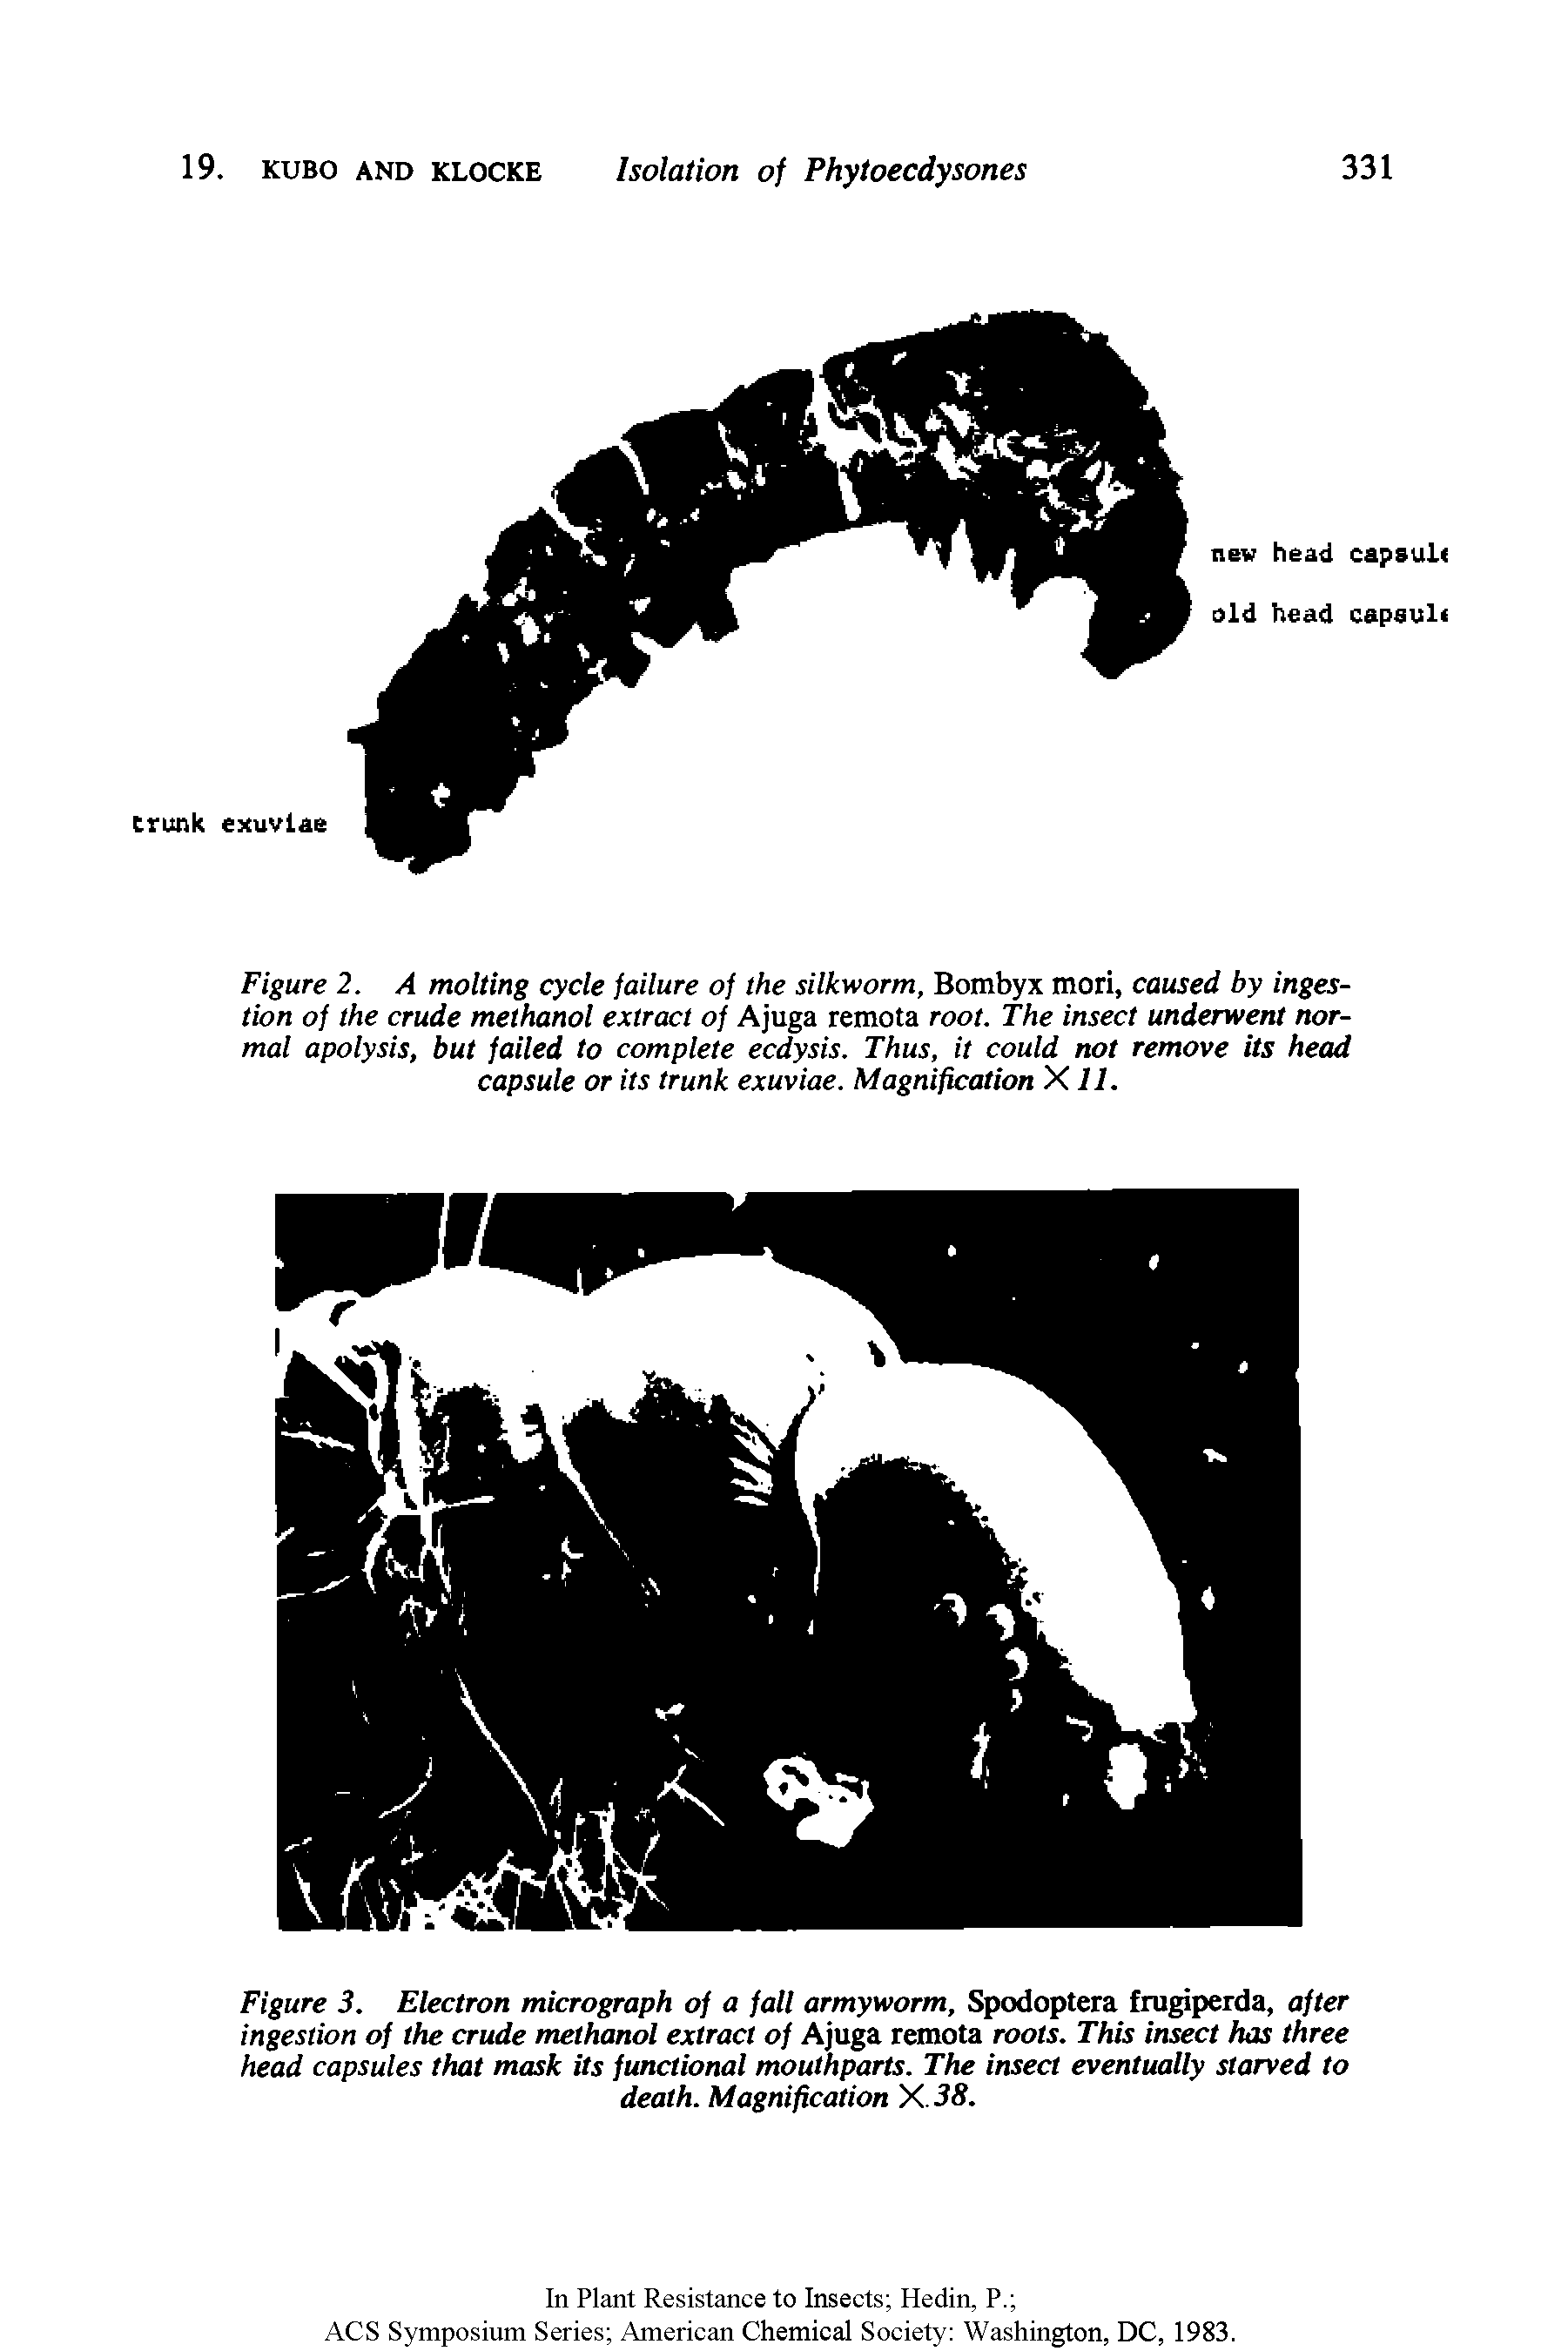 Figure 2. A molting cycle failure of the silkworm, Bombyx mori, caused by ingestion of the crude methanol extract of Ajuga remota root. The insect underwent normal apolysis, but failed to complete ecdysis. Thus, it could not remove its head capsule or its trunk exuviae. Magnification X11.